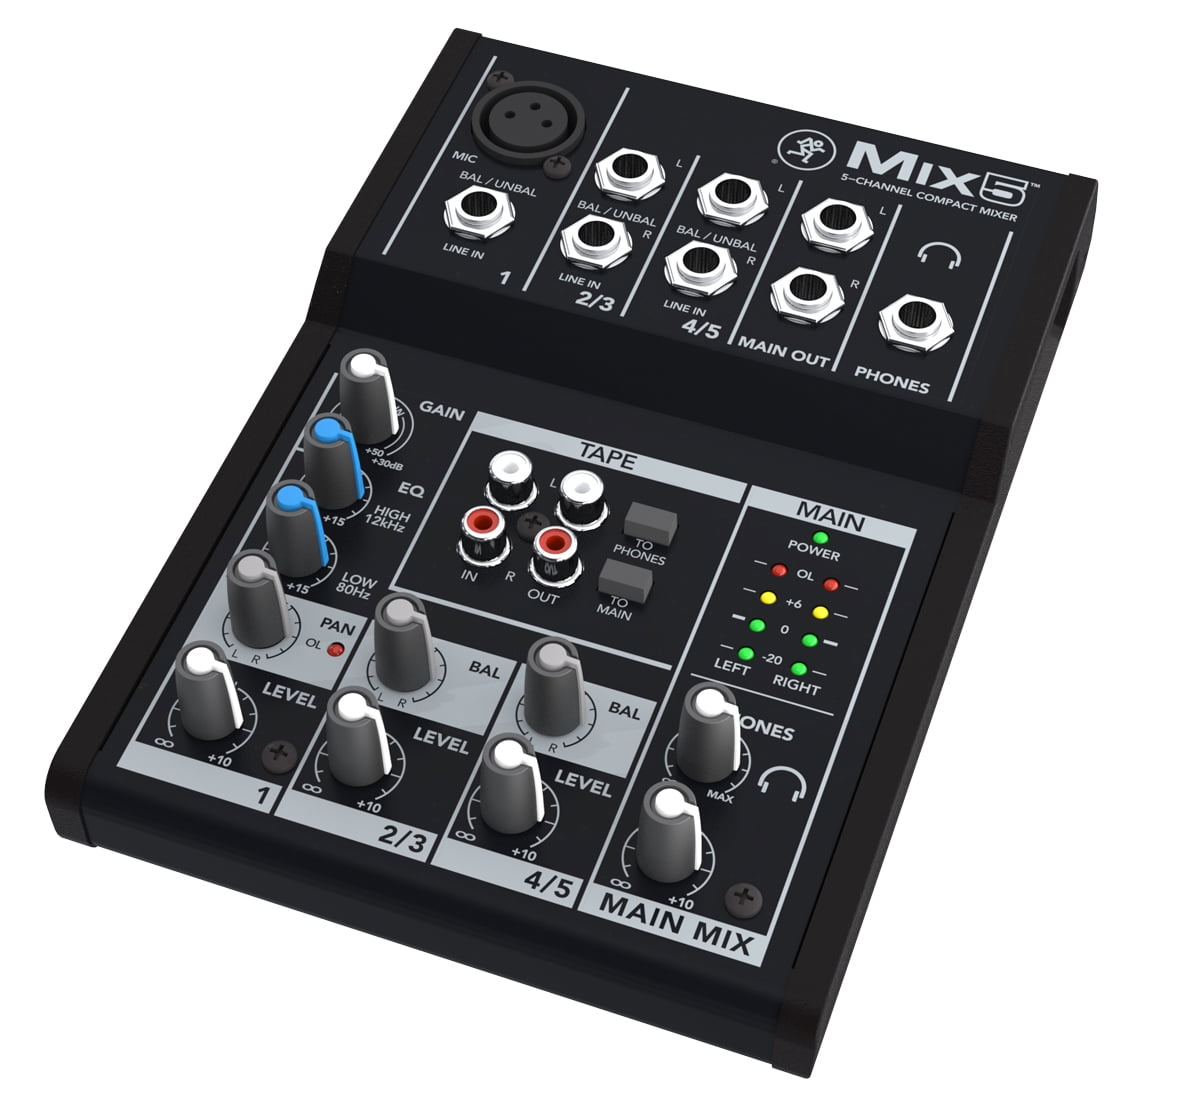 Neewer Stereo 5 Channel Mixer Compact Mini Mixing Console Echo DSP Effects,LCD Display Screen,Built-in SD card/USB/MP3/48V Phantom Power Functions for Sound Recording,Music Editing NW-05 